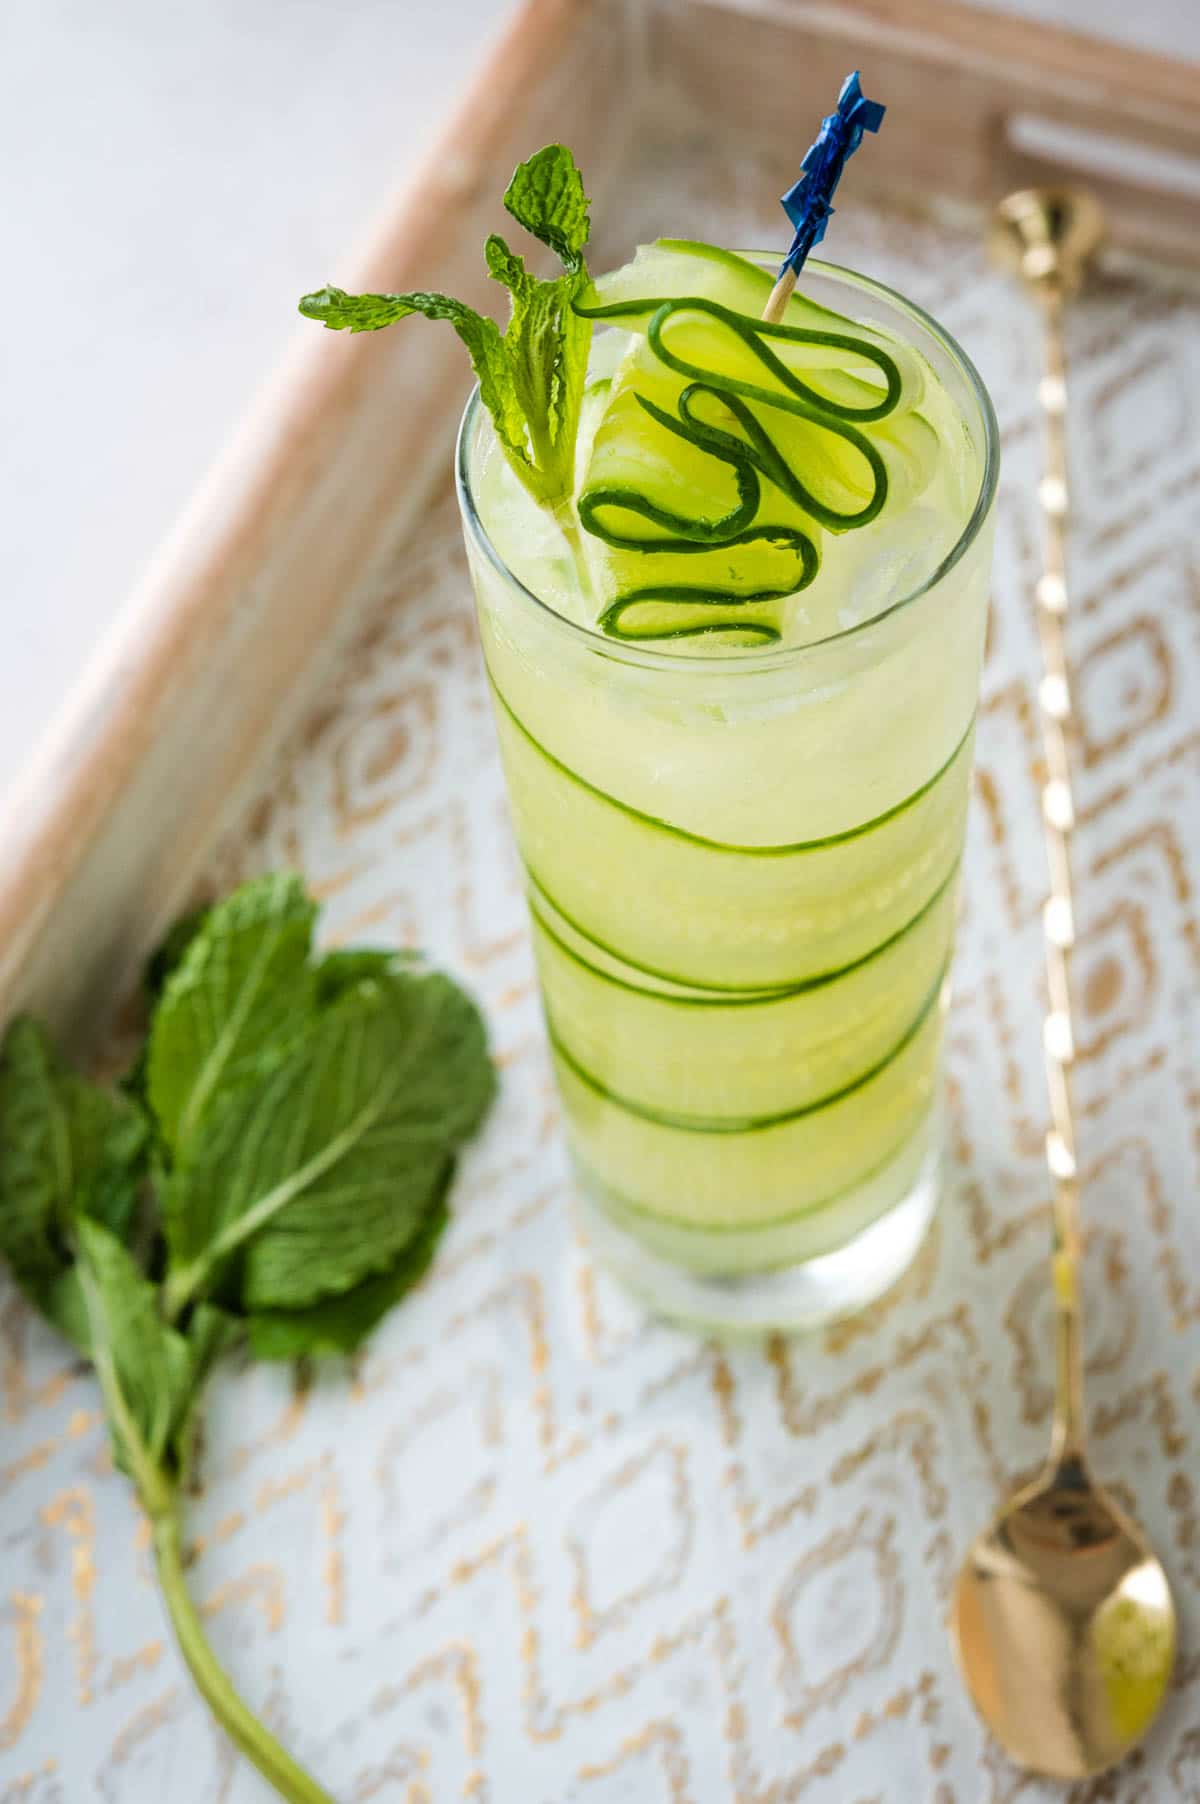 Serving a cucumber pioneer with cucumber garnish on a white and gold tray.